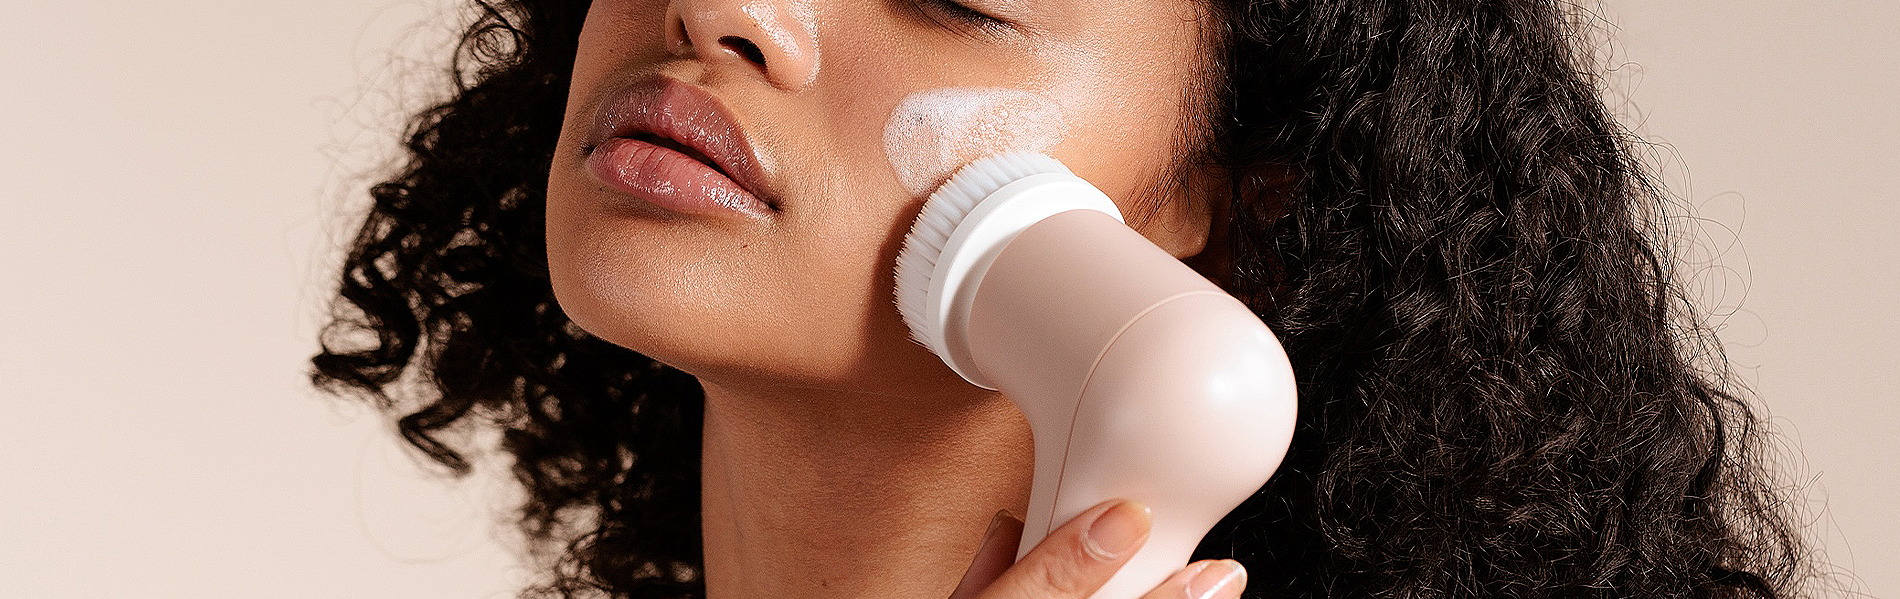 Affordable At-Home Skincare Devices for Every Budget